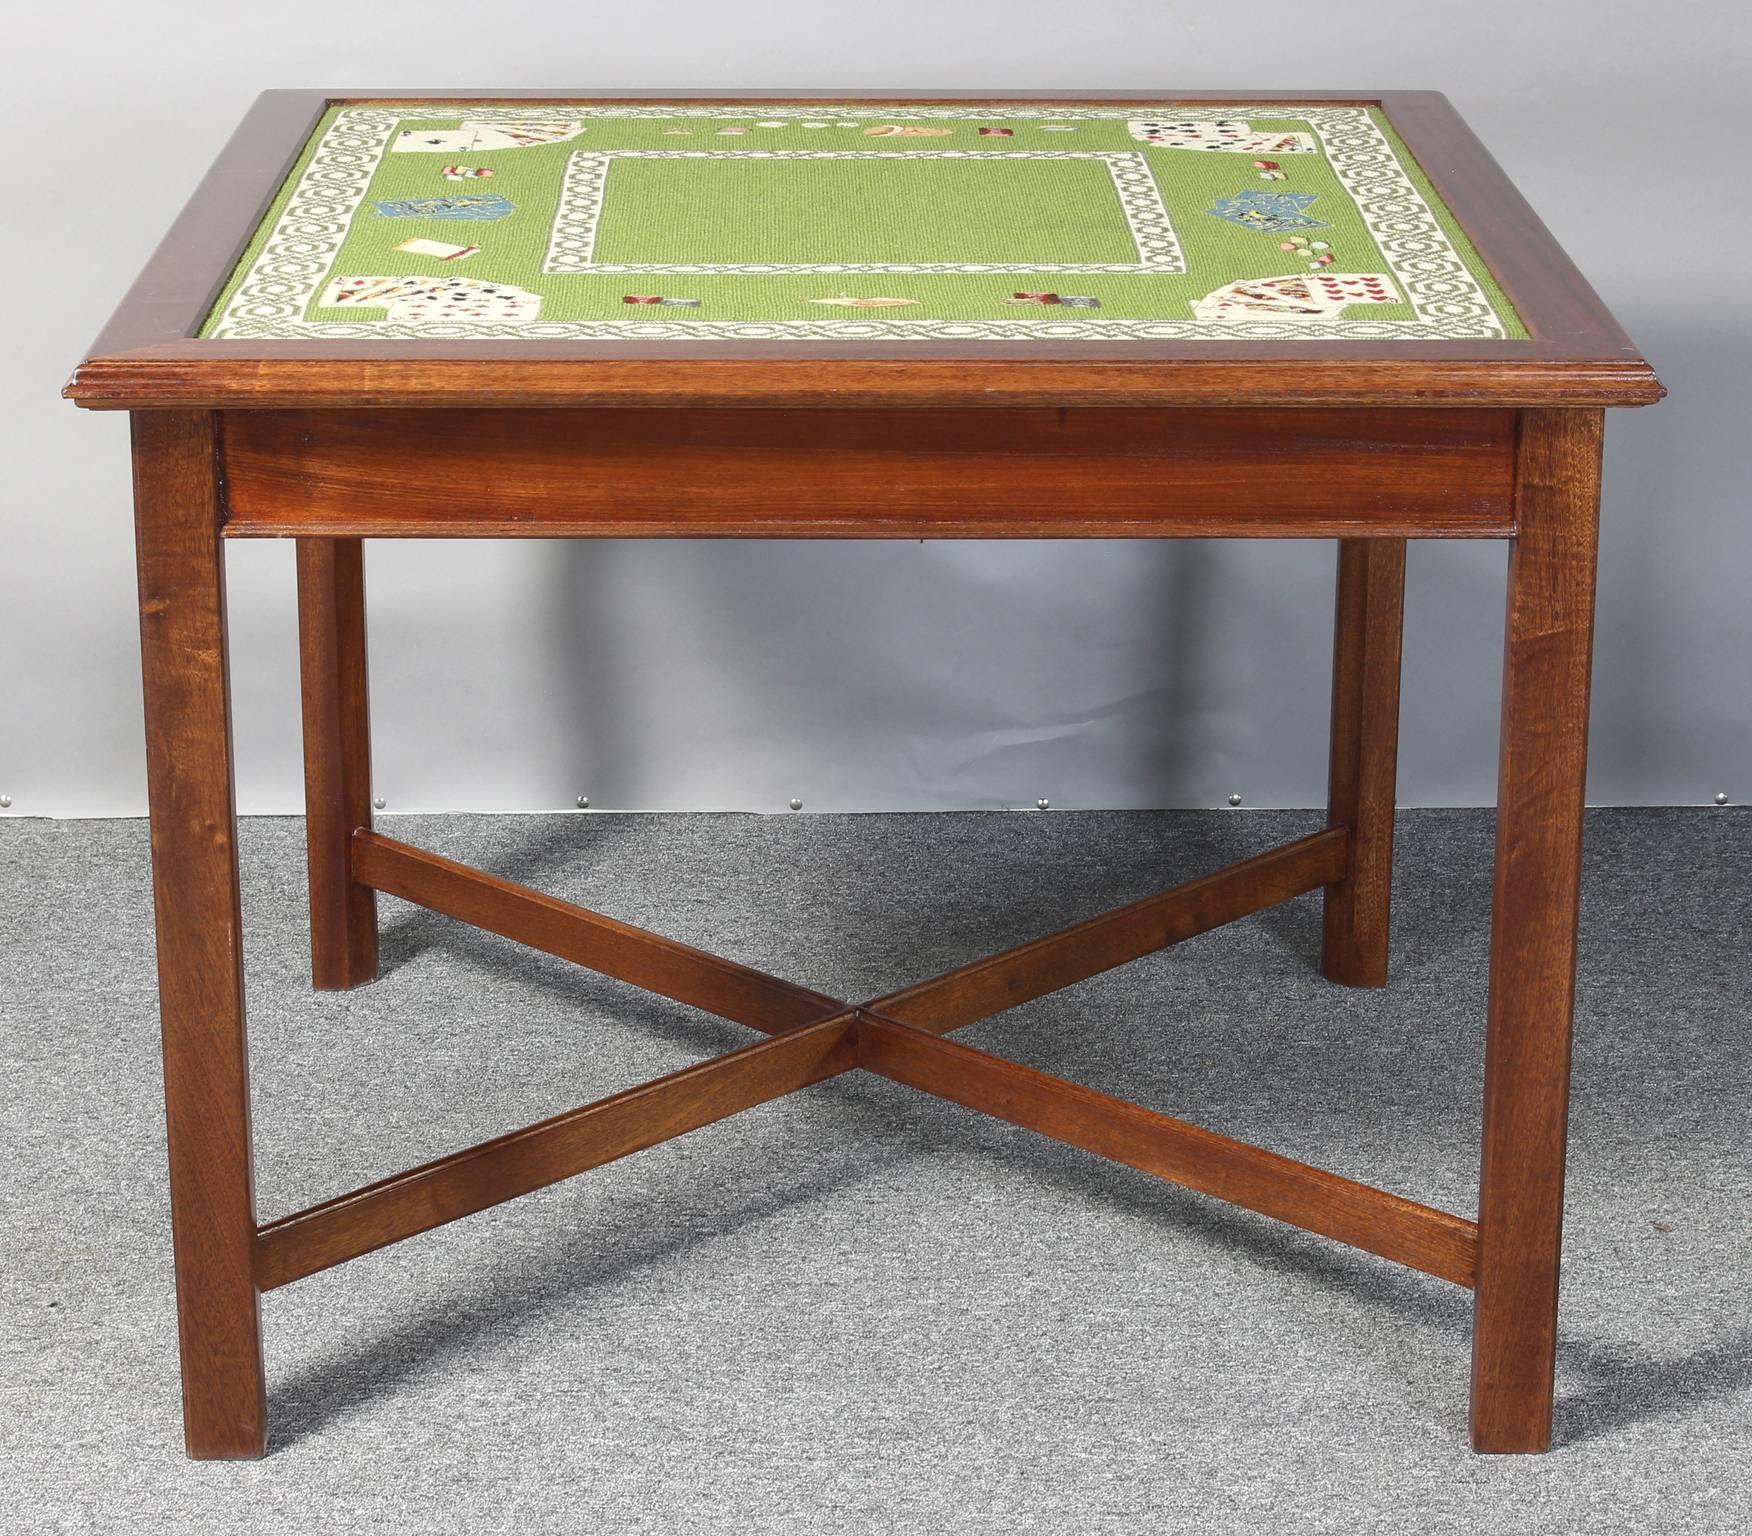 A wonderful custom-made mahogany and needlepoint card or games table. The exquisitely executed vintage needlepoint trompe l'oeil surface depicts a card game on a soft green ground and is in remarkably good condition.